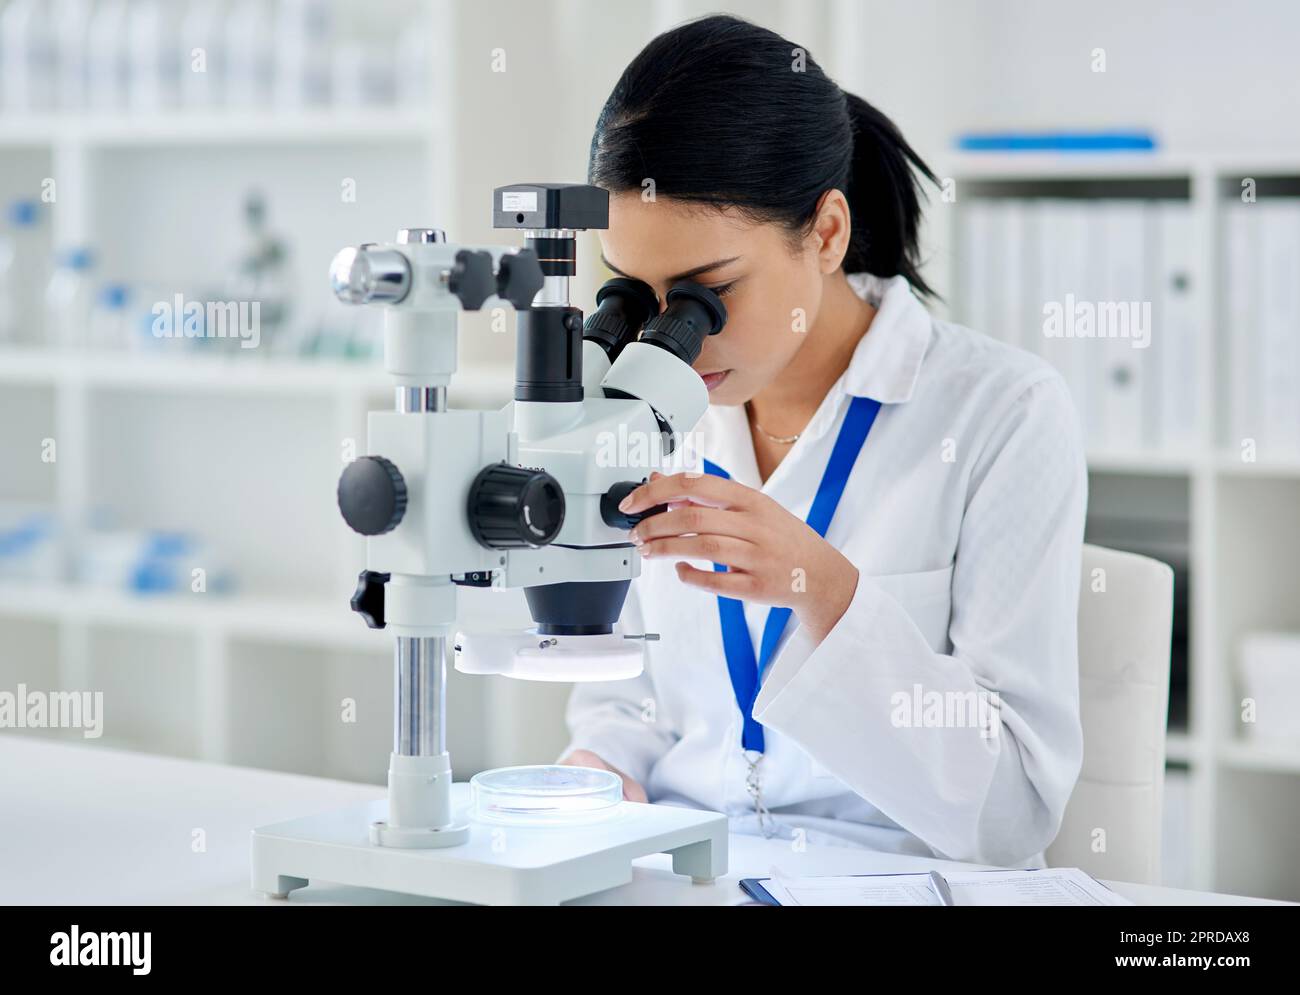 Medical research done right. a young scientist using a microscope in a laboratory. Stock Photo